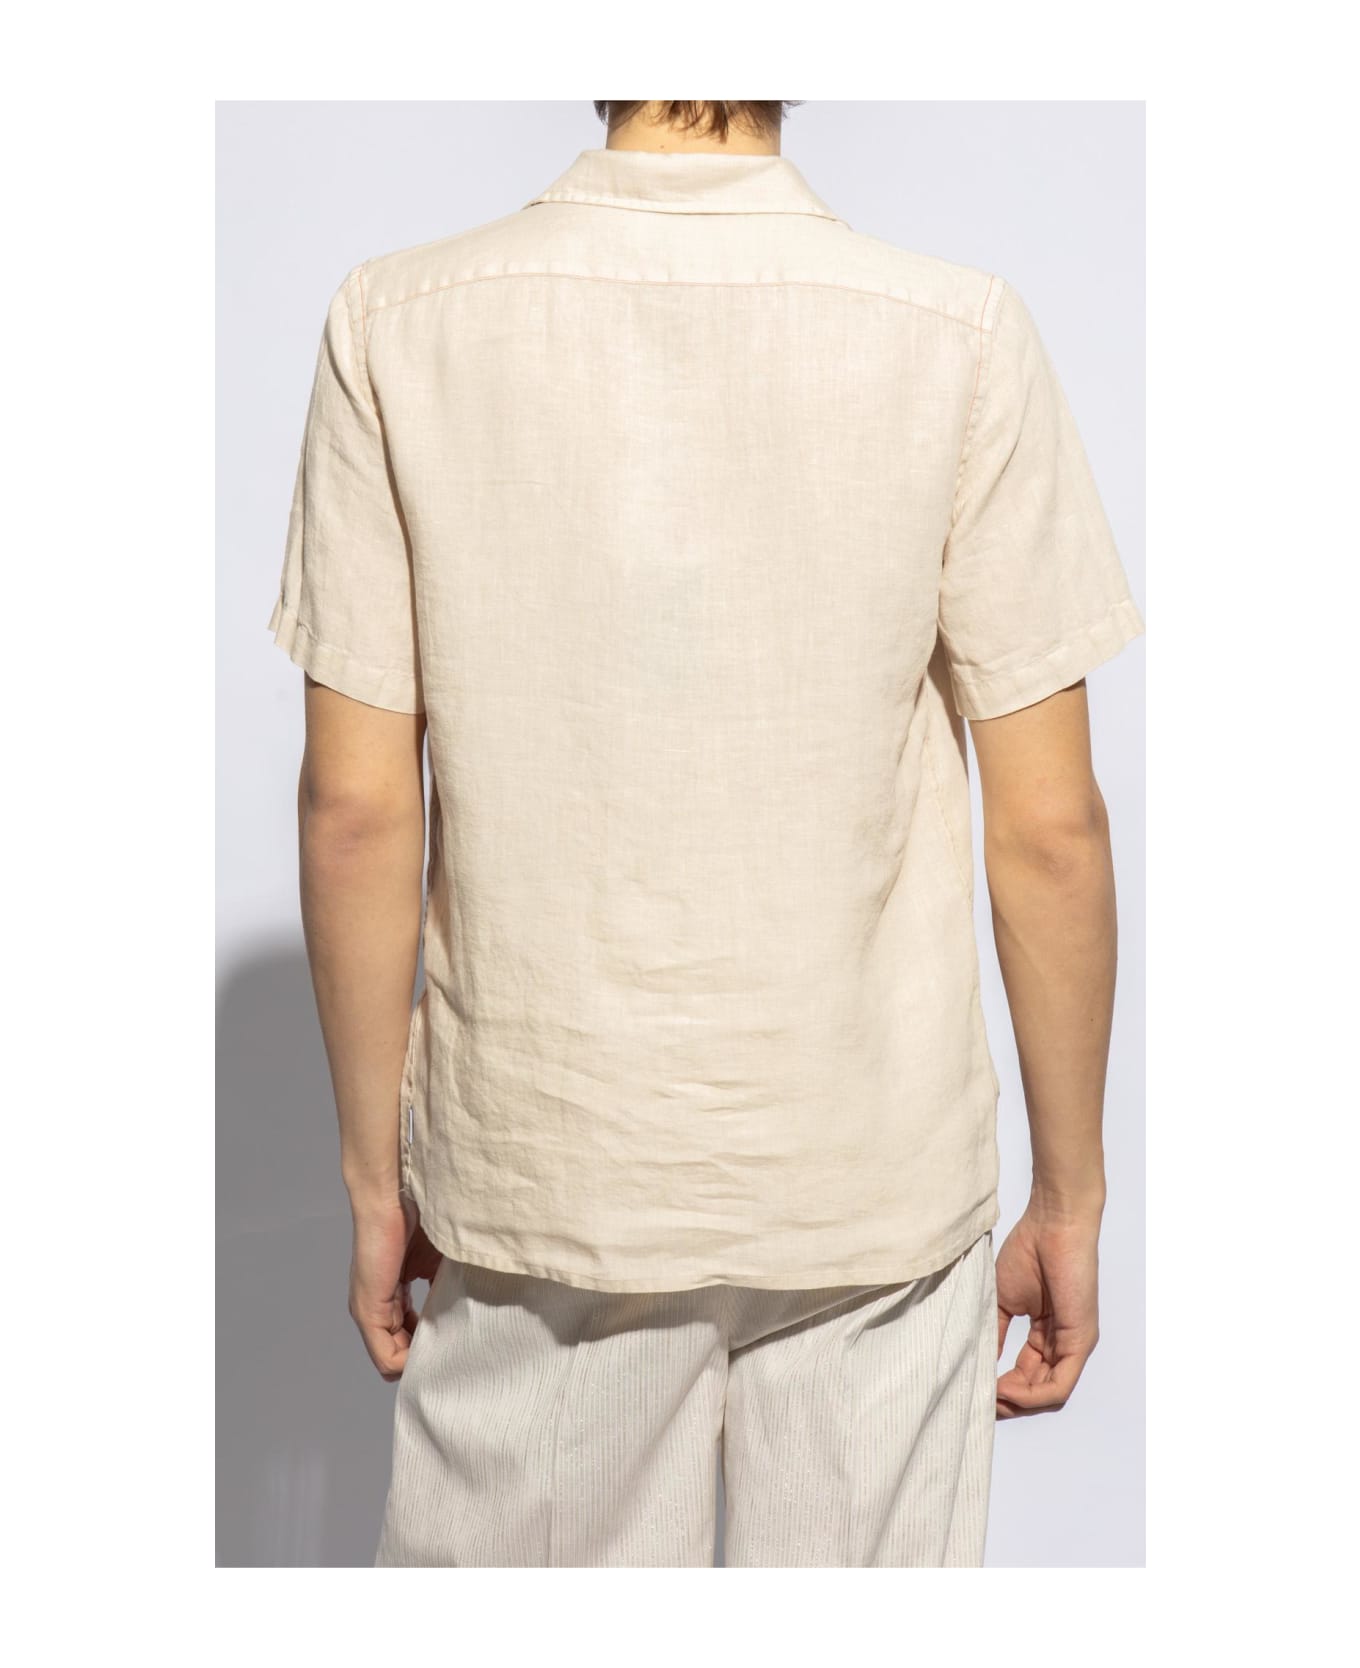 PS by Paul Smith Linen Shirt With Short Sleeves - Beige シャツ